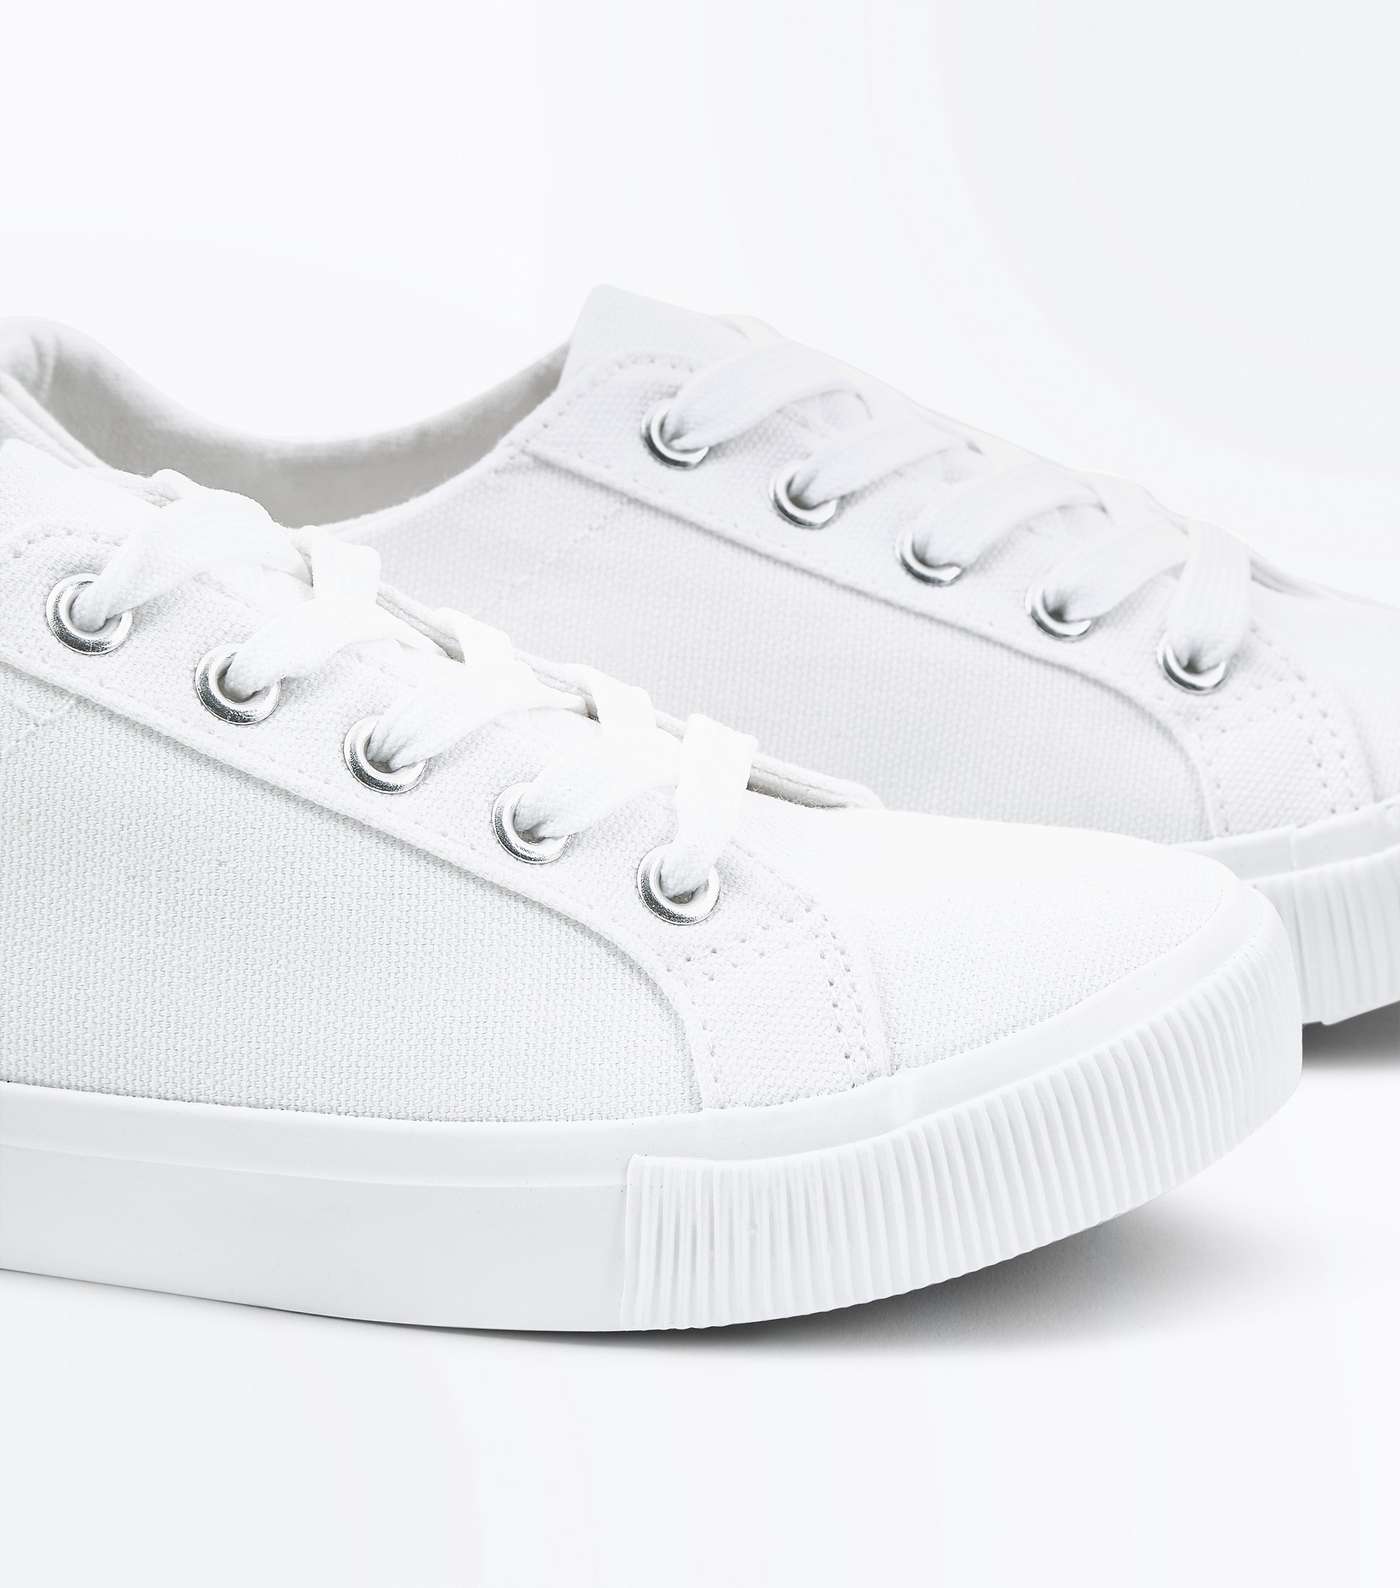 Girls White Canvas Lace Up Trainers Image 3